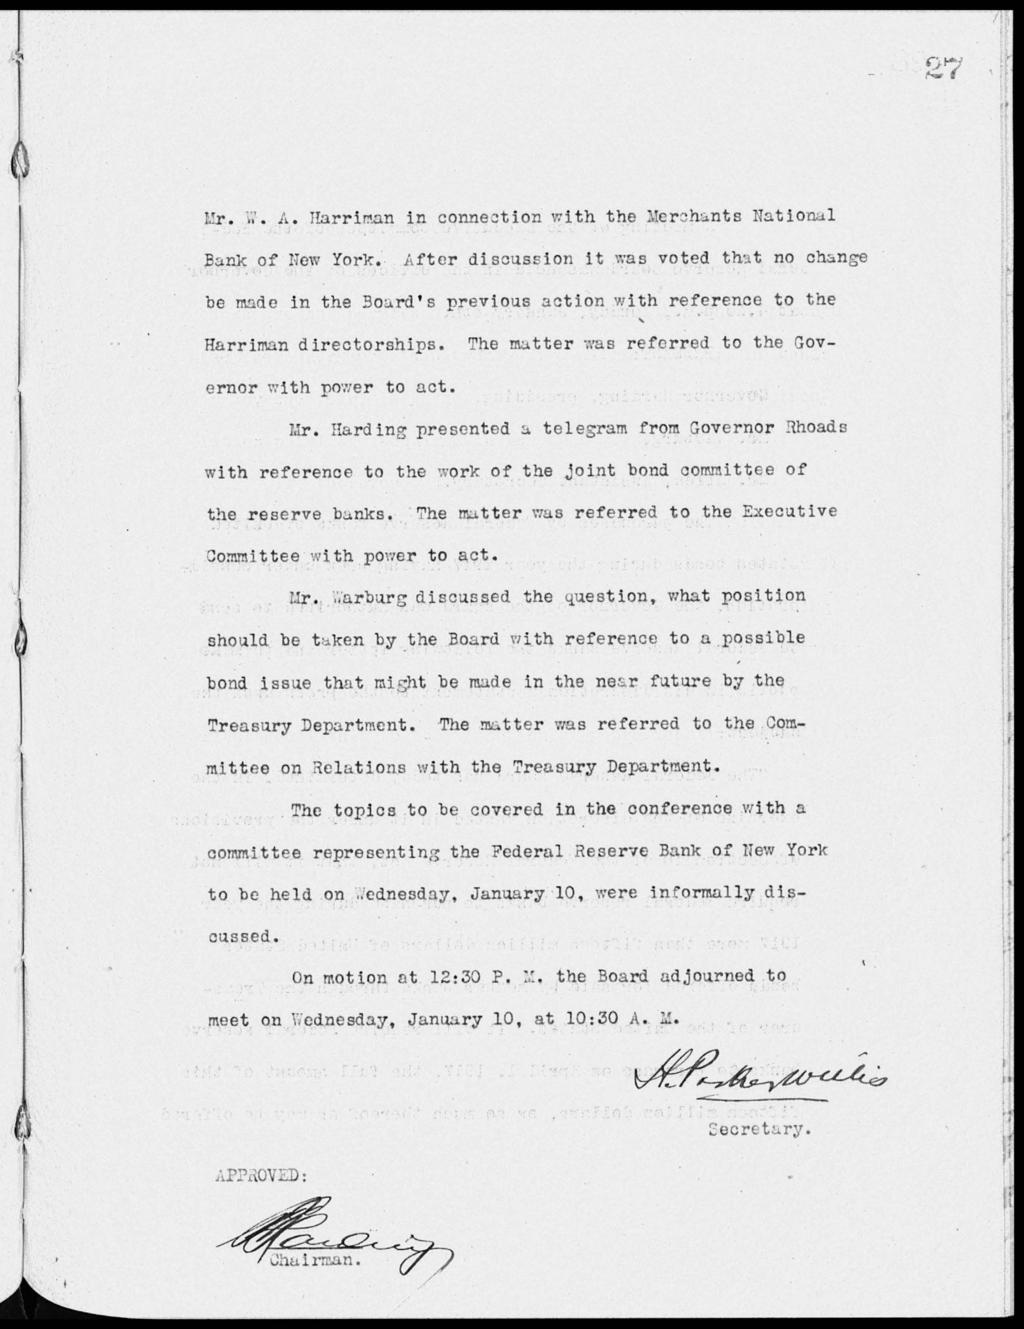 1.7r.. A. Harriman in connection with the Merchants National Bank of New York.